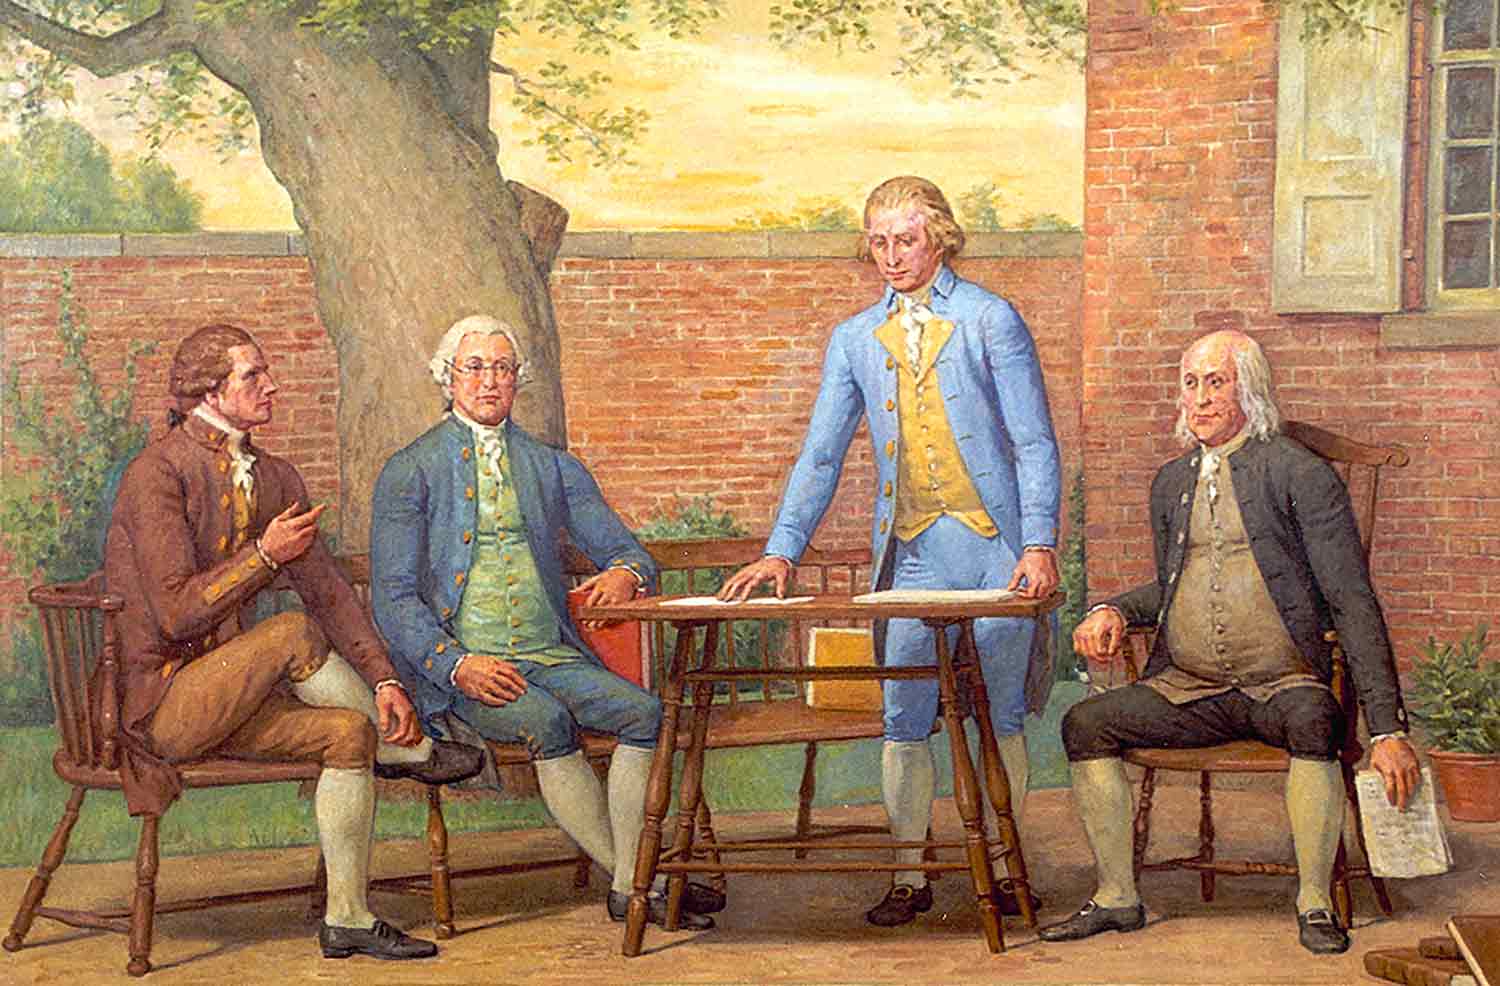 Four men in 18th century clothing sit at a table outdoors.